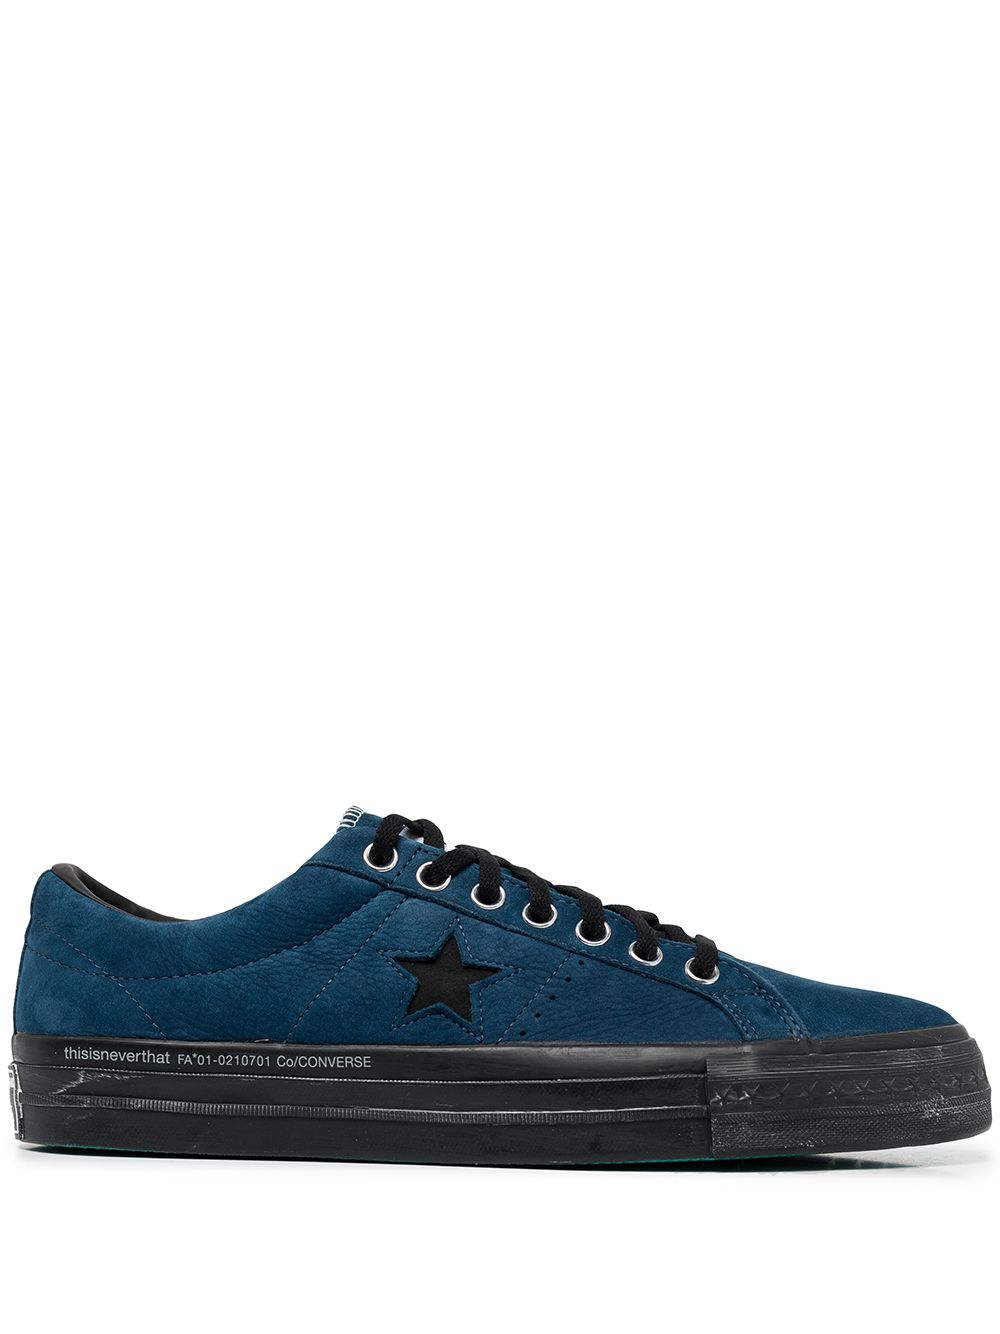 Converse One Star Suede Sneakers - Farfetch